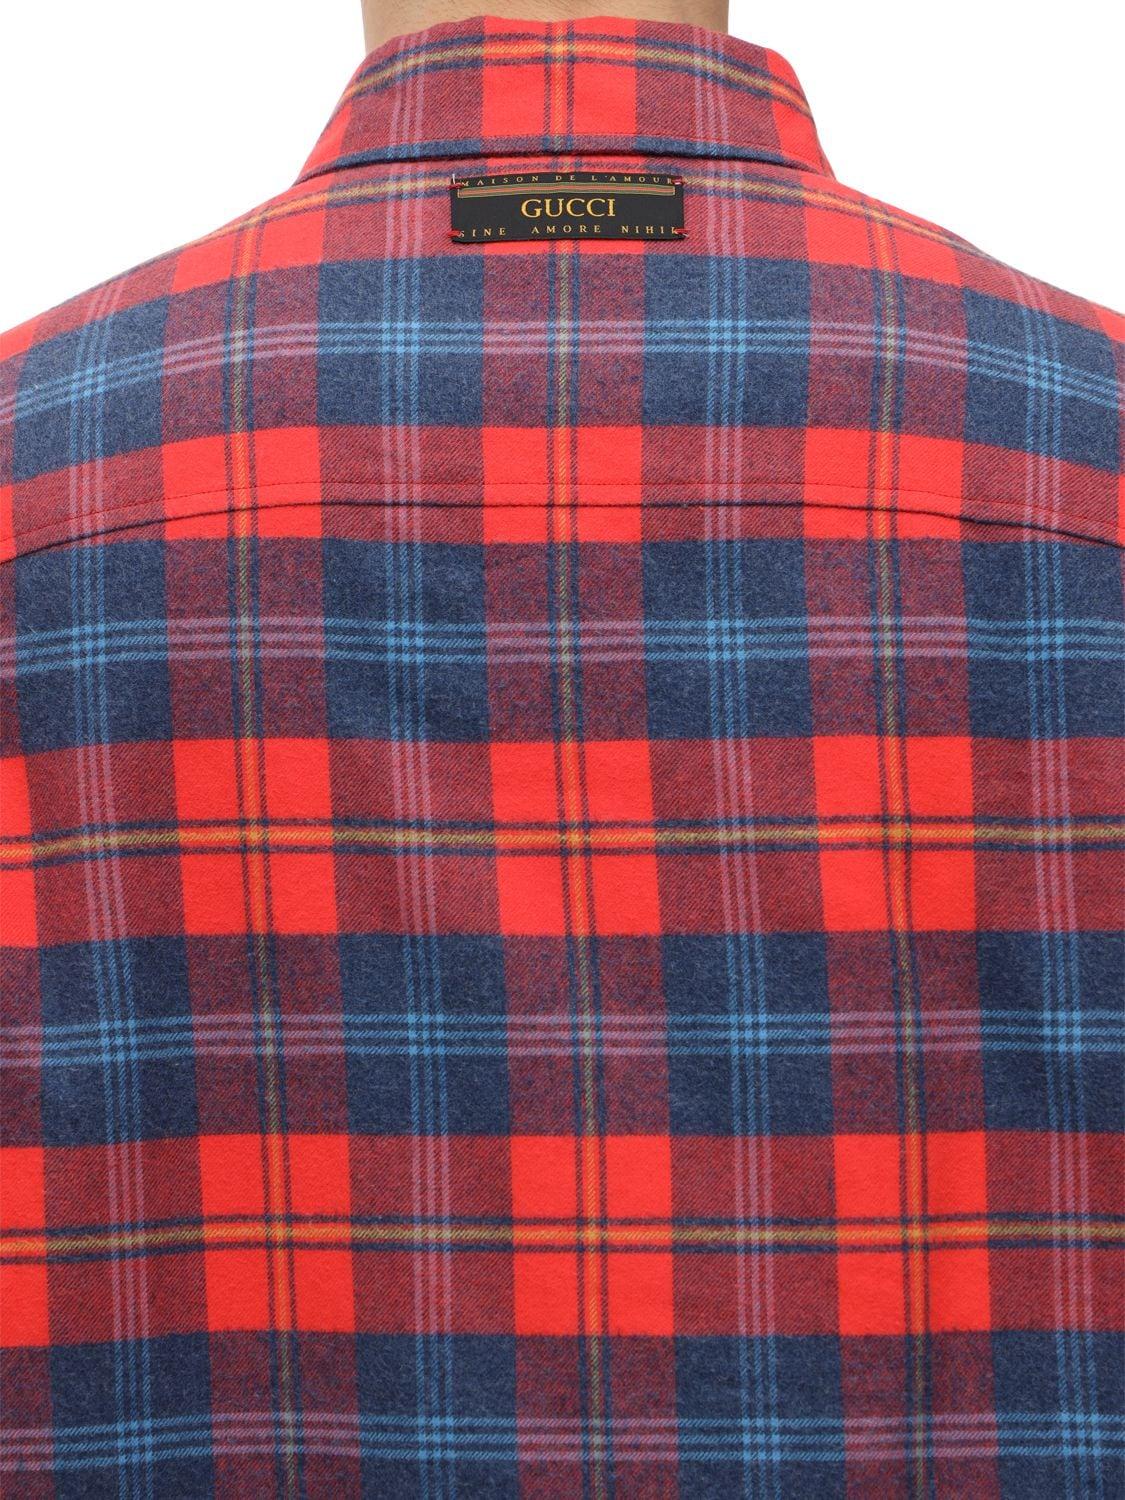 Gucci X Disney Cotton Shirt Shirt in Red for Men - Save 51% | Lyst